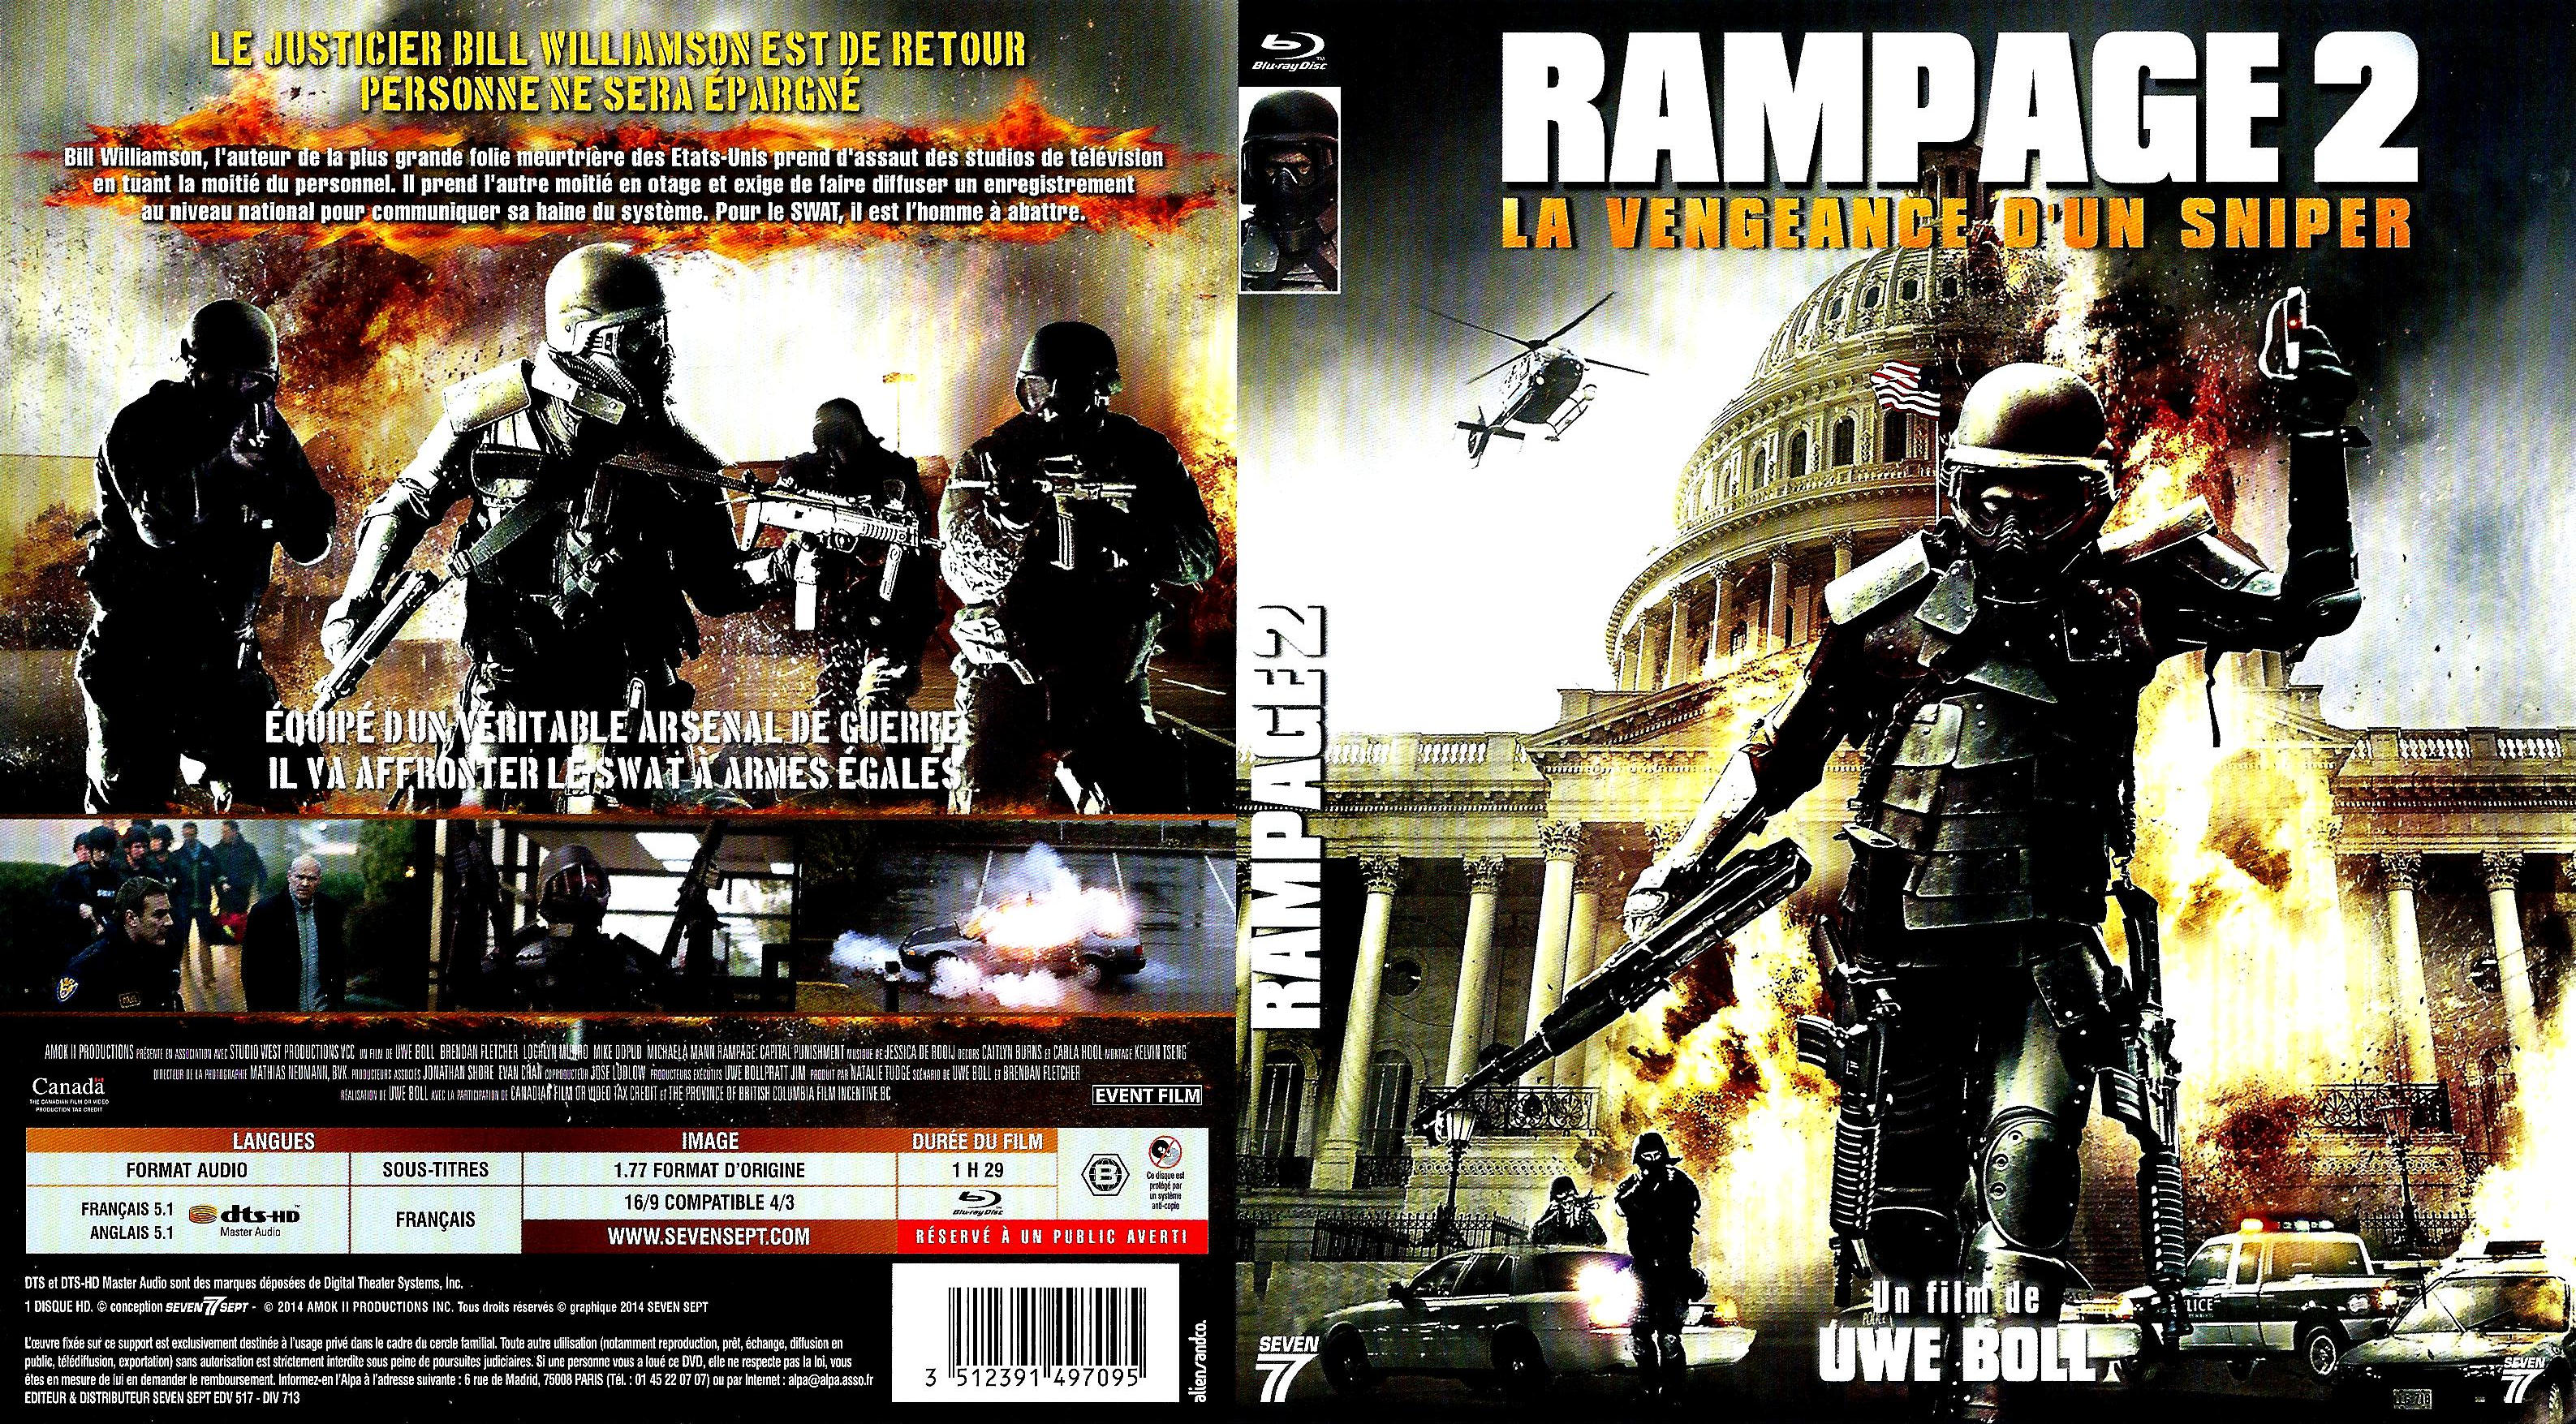 Jaquette DVD Rampage 2 (BLU-RAY)